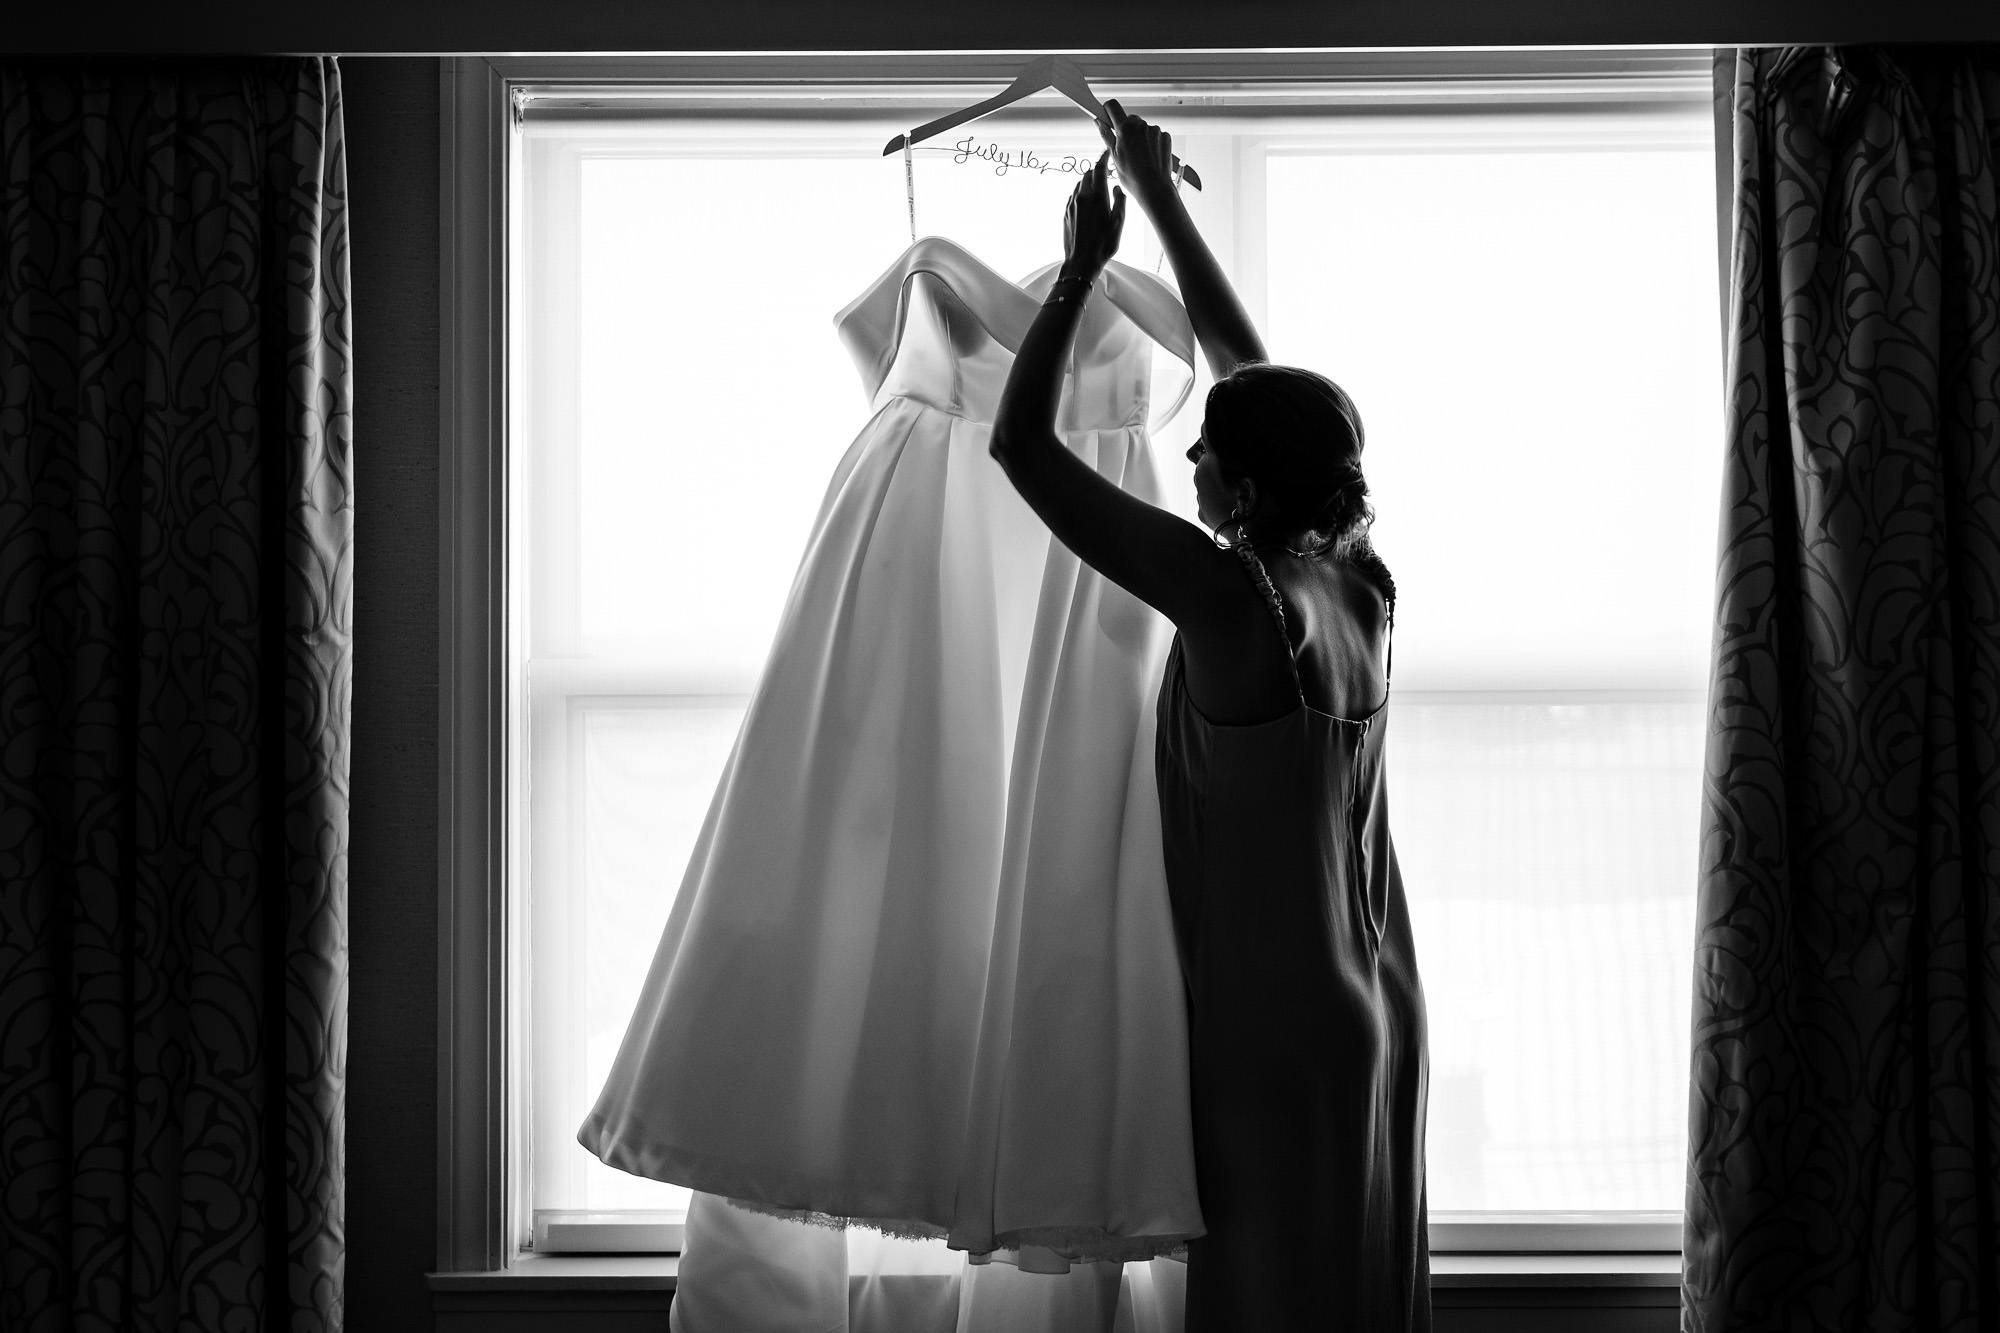 A bridesmaid grabs the wedding dress for the bride to change into.